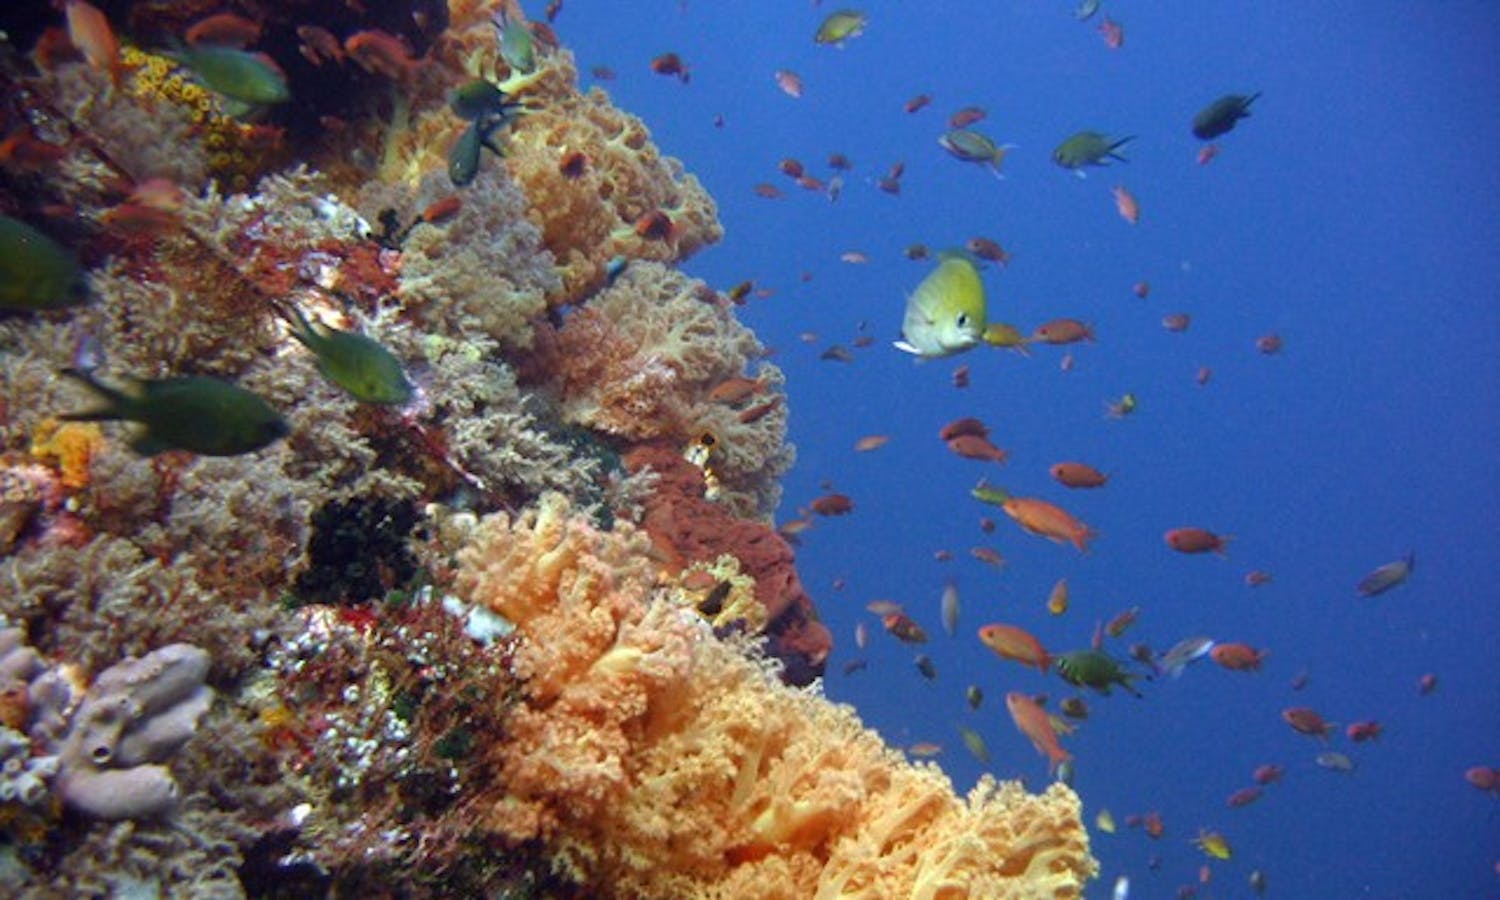 Photograph of fish swimming through a coral reef